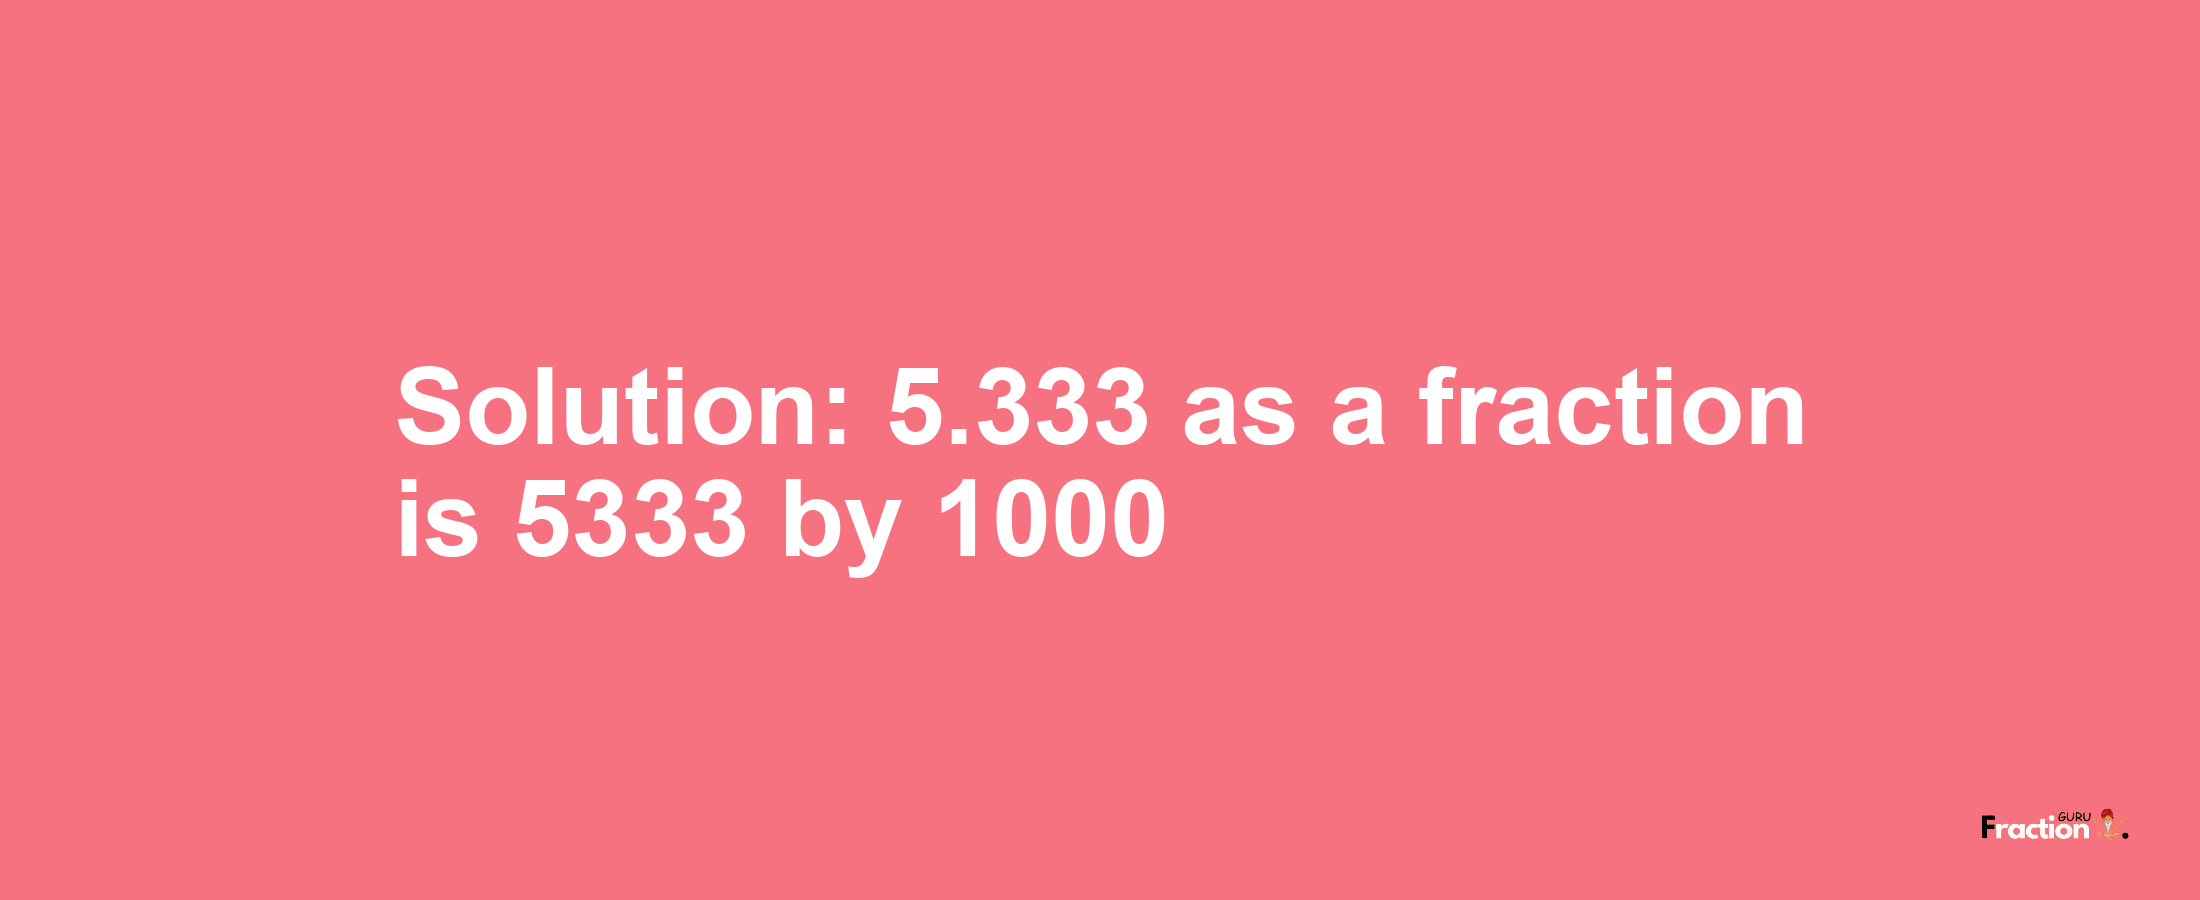 Solution:5.333 as a fraction is 5333/1000